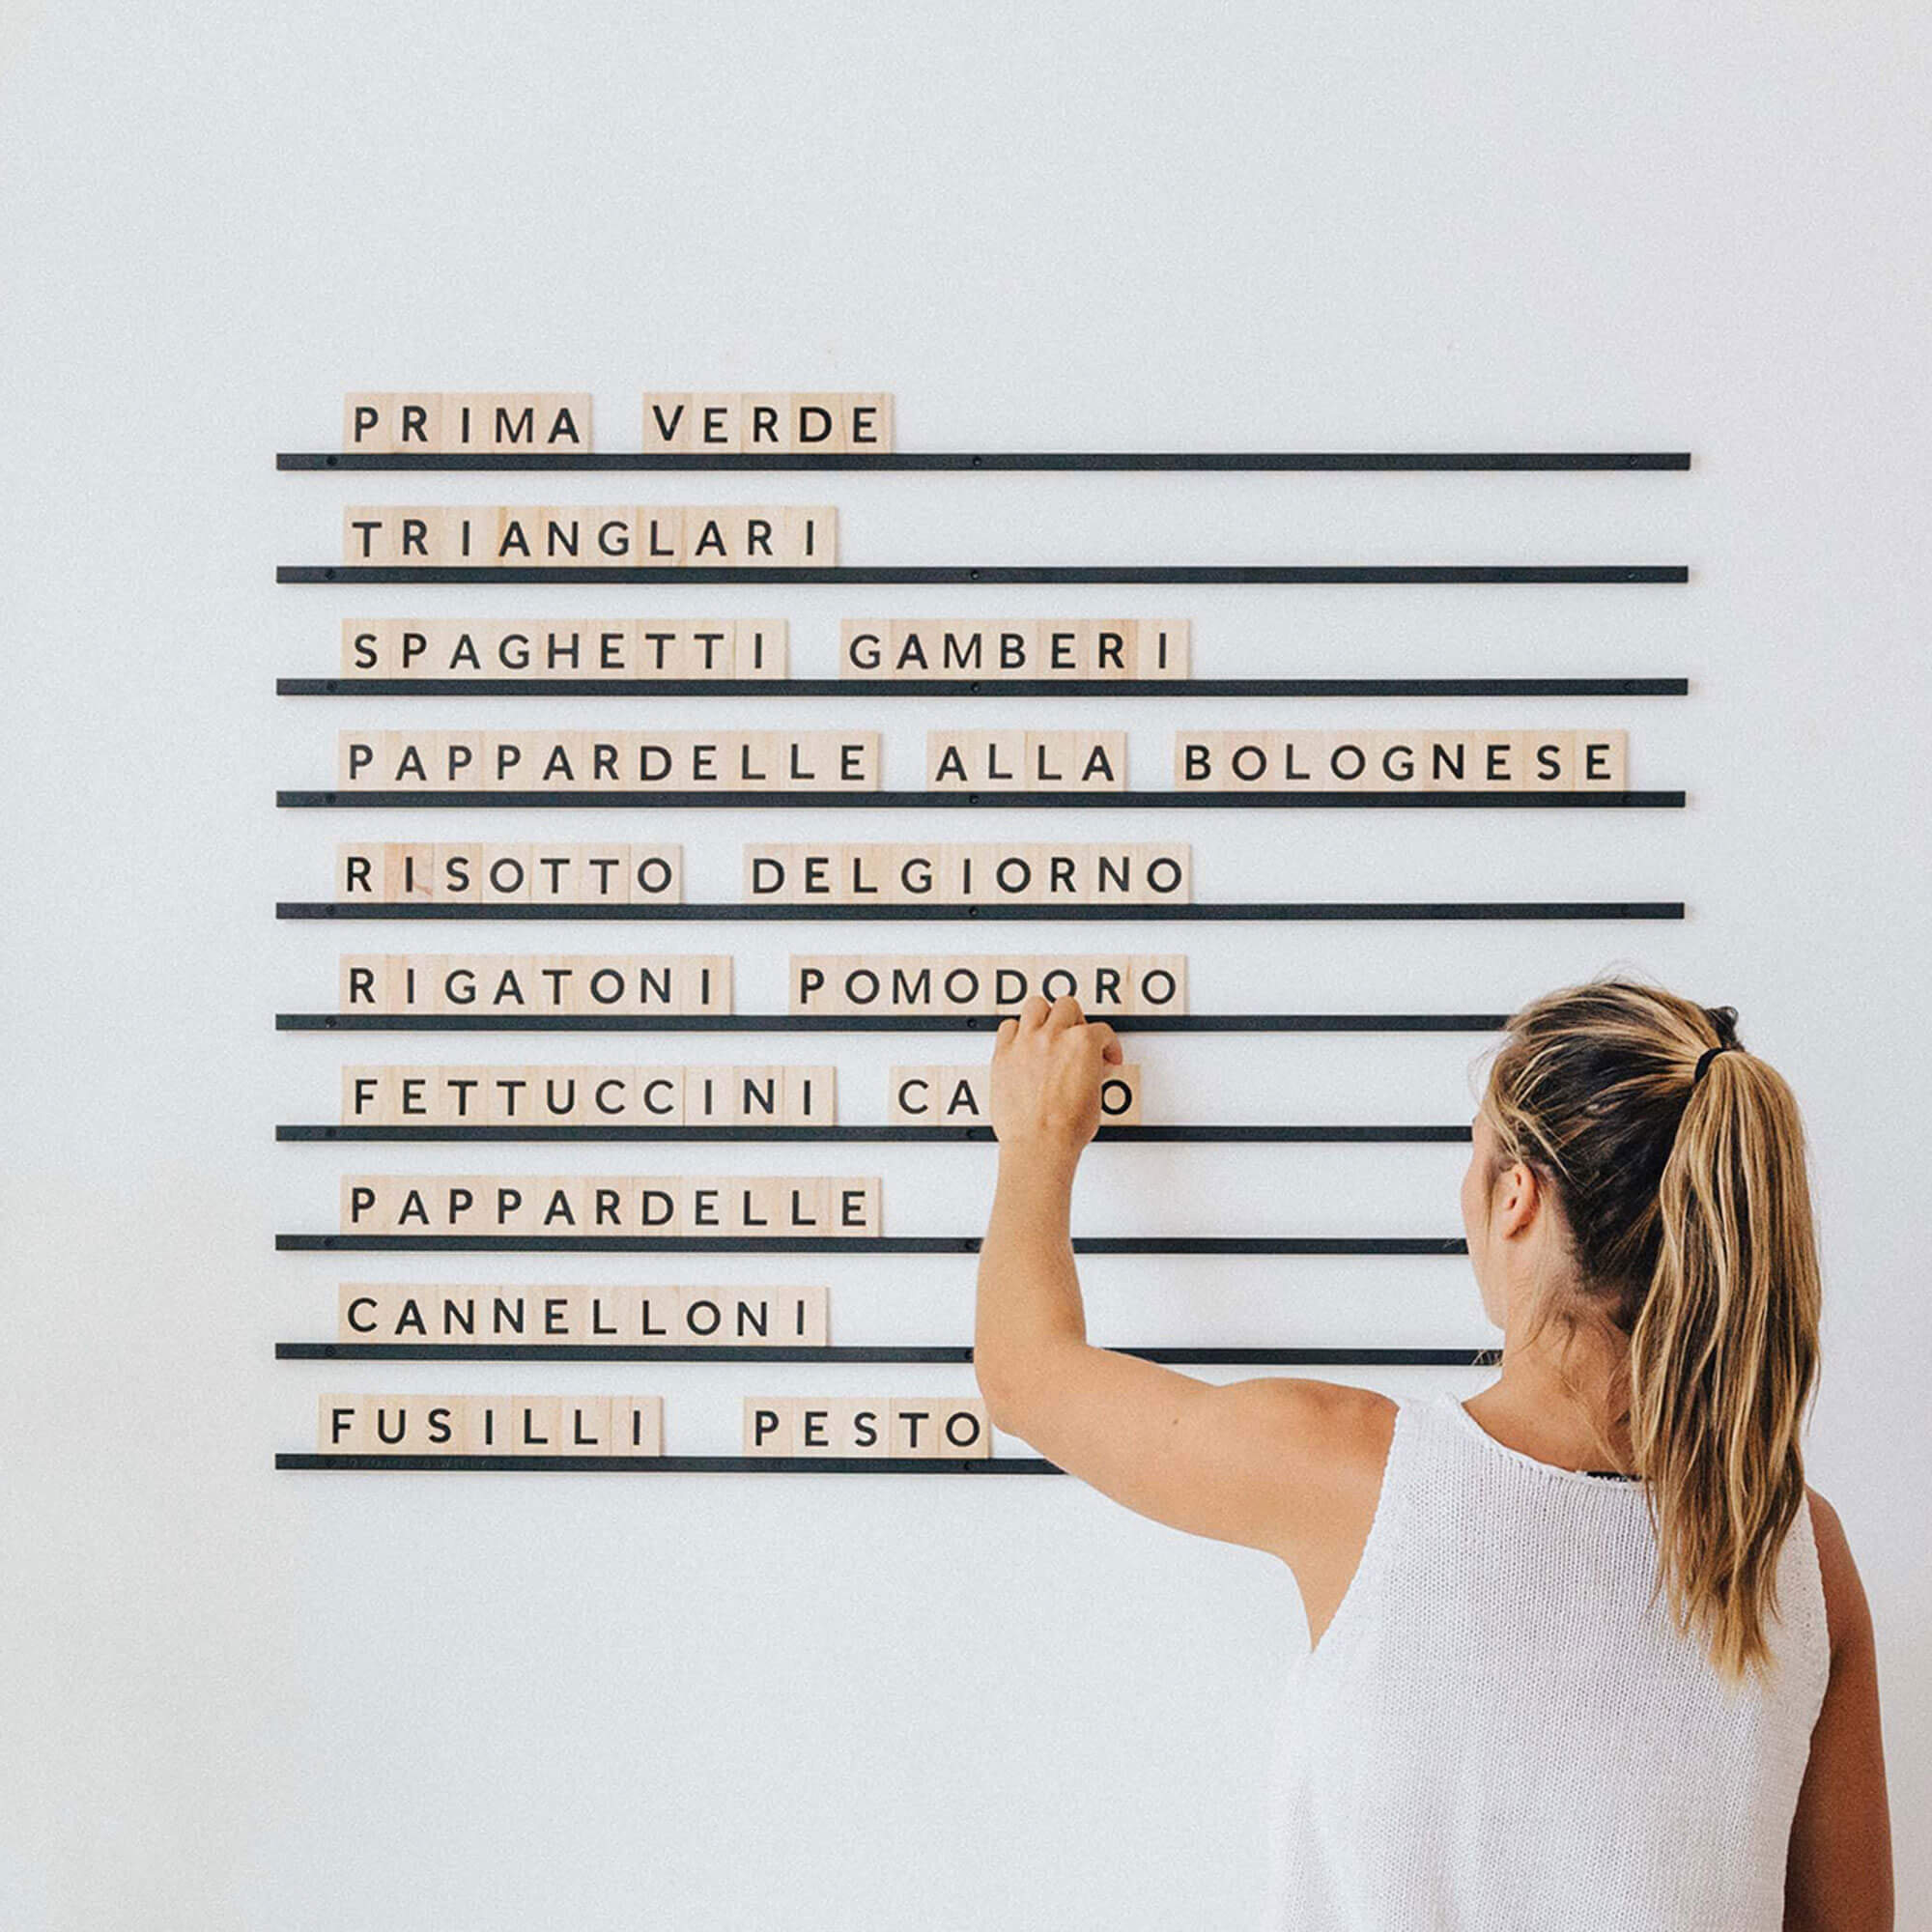 A girl adding wooden letter tiles to wall-mounted rails to display a pasta menu on a white wall